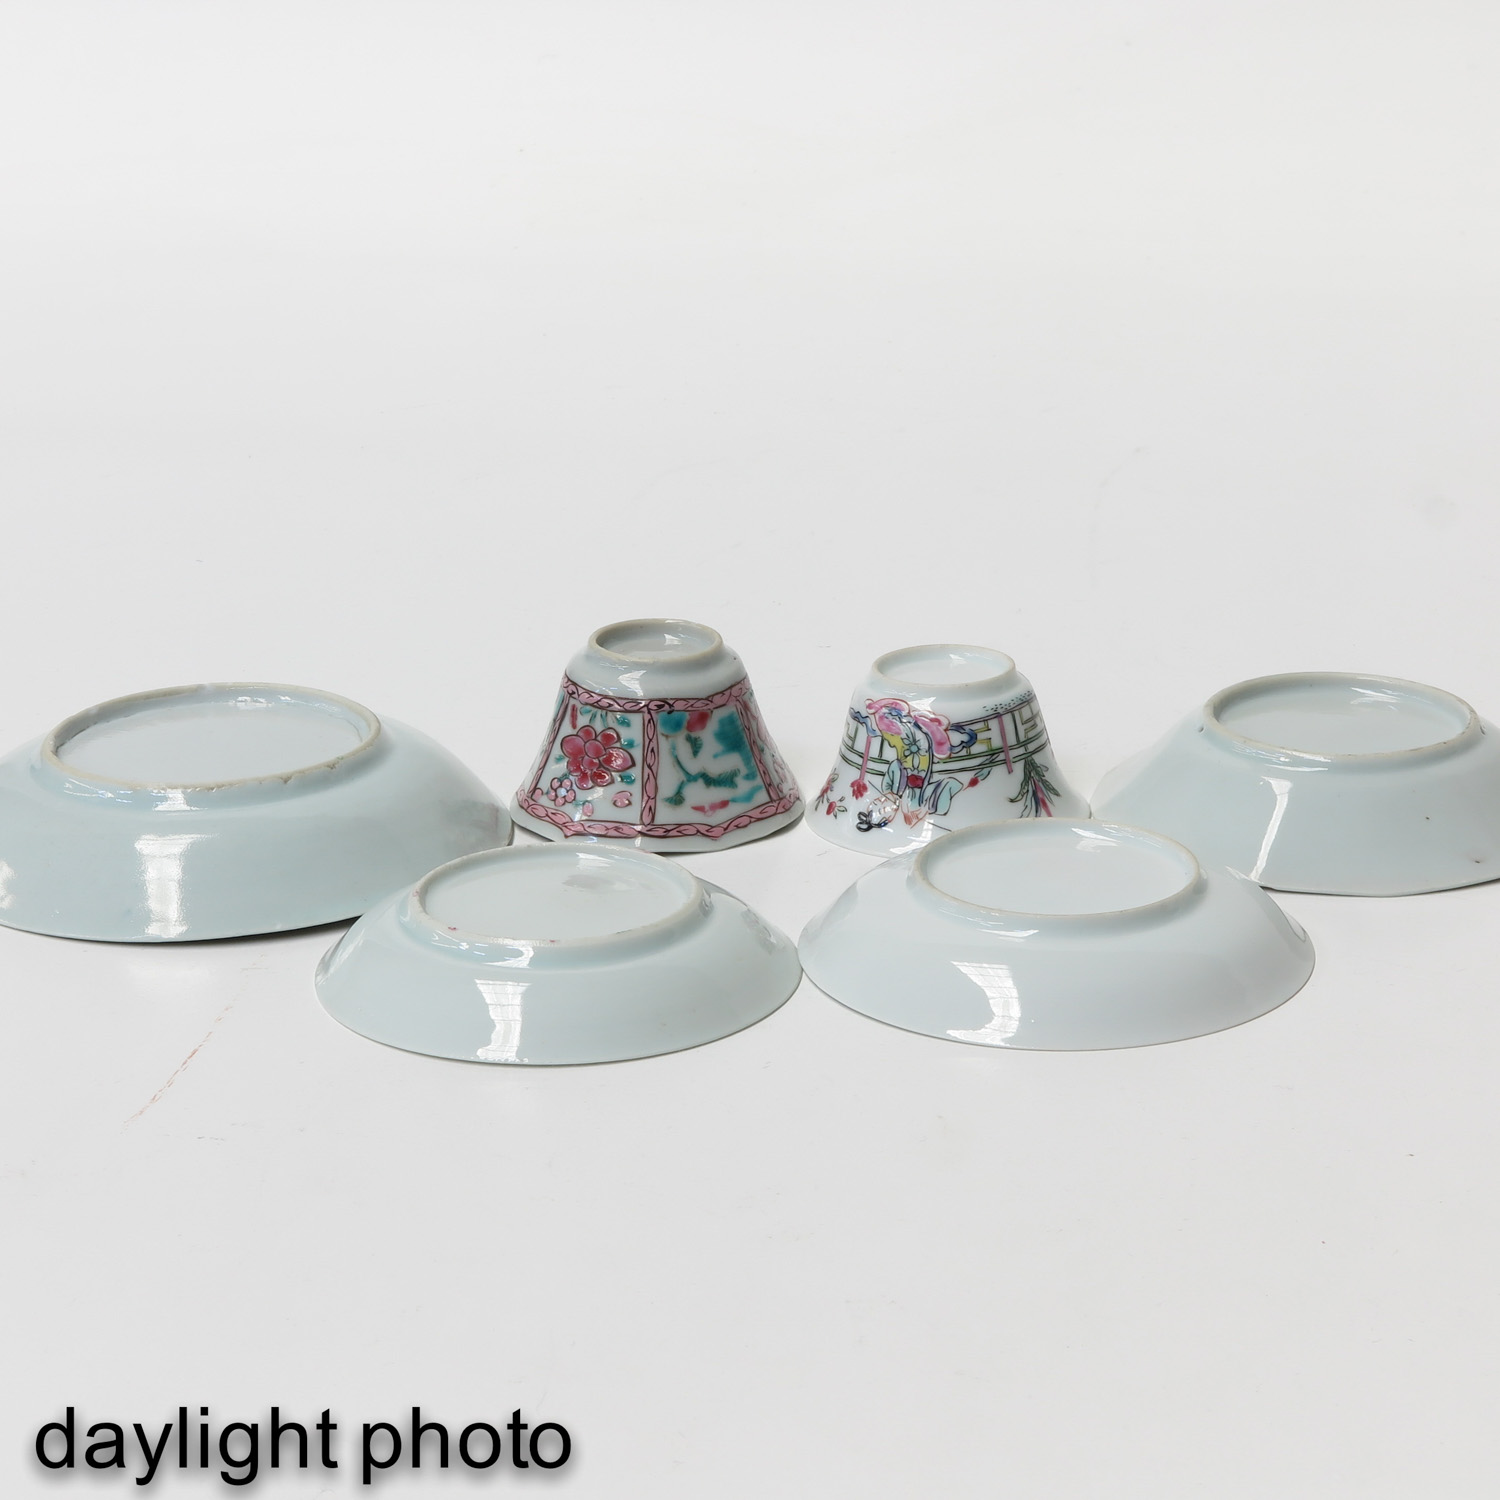 A Diverse Collection of Porcelain - Image 10 of 10